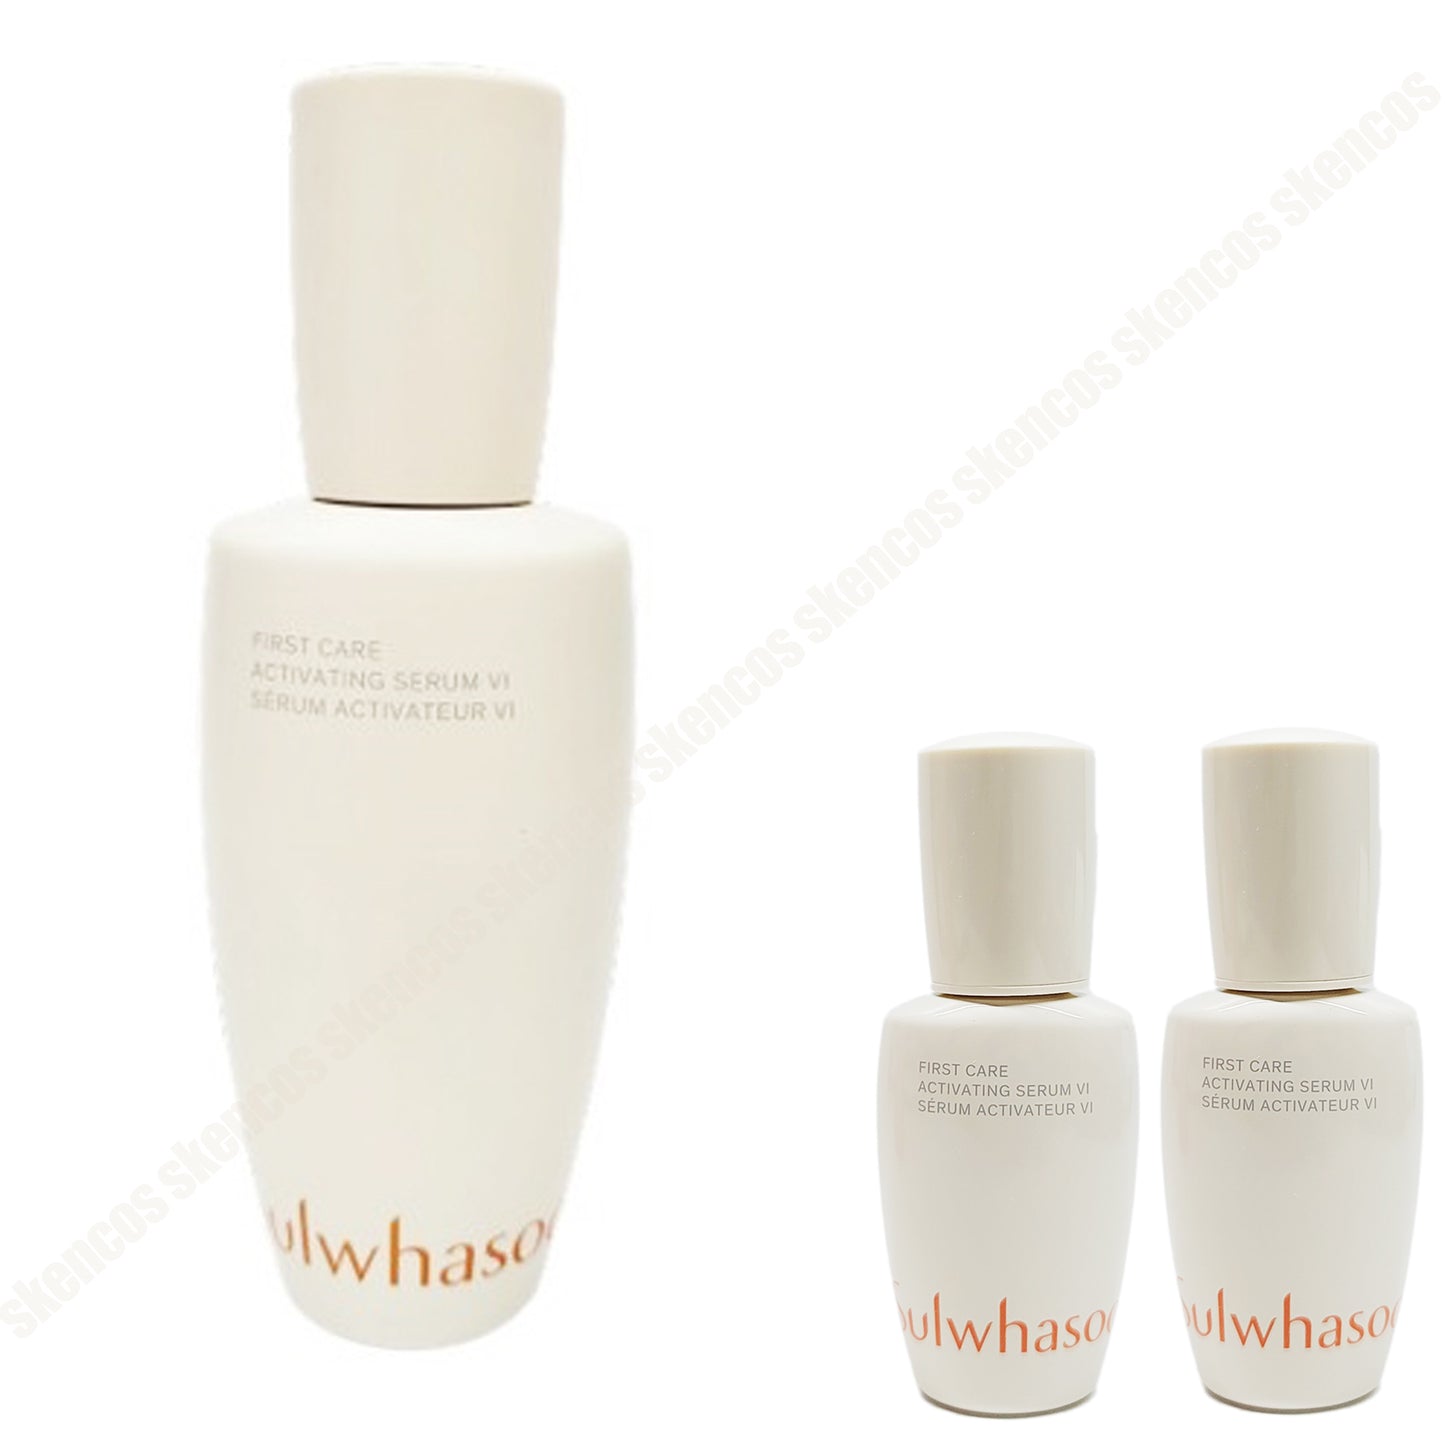 Sulwhasoo First Care Activating Serum 90ml/No Case + 30ml(120ml)/Anti-aging/Wrinkle